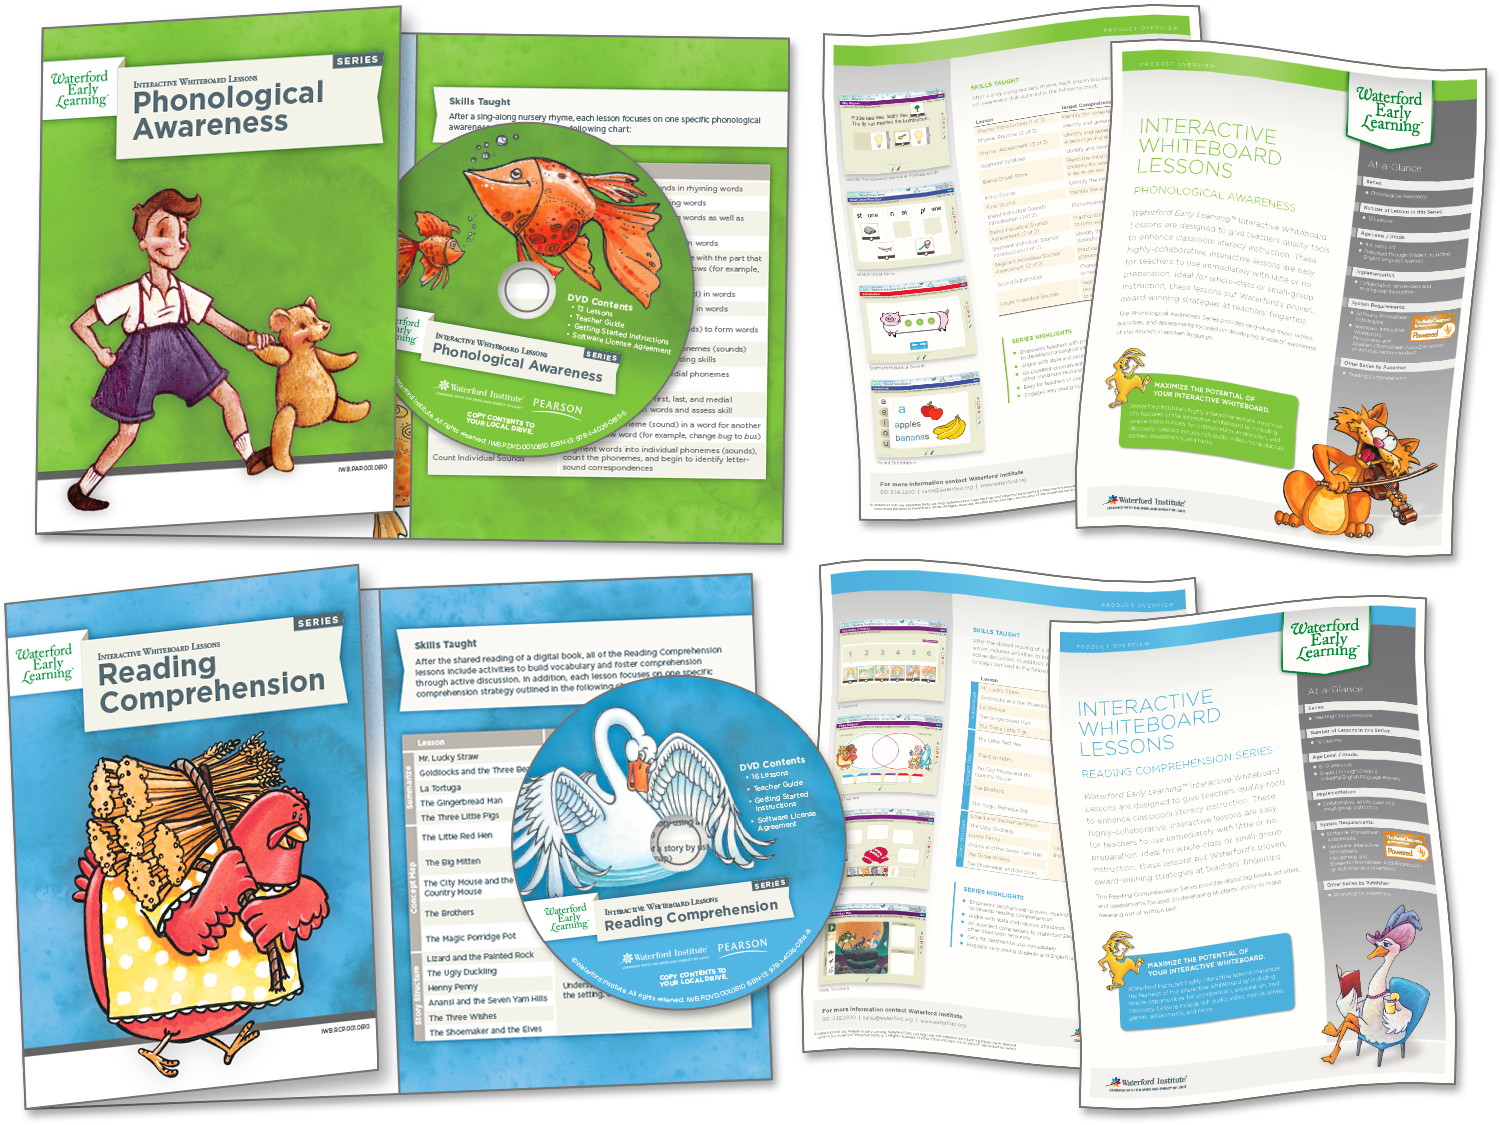 41 | 46 · Interactive Whiteboard Lessons Packaging